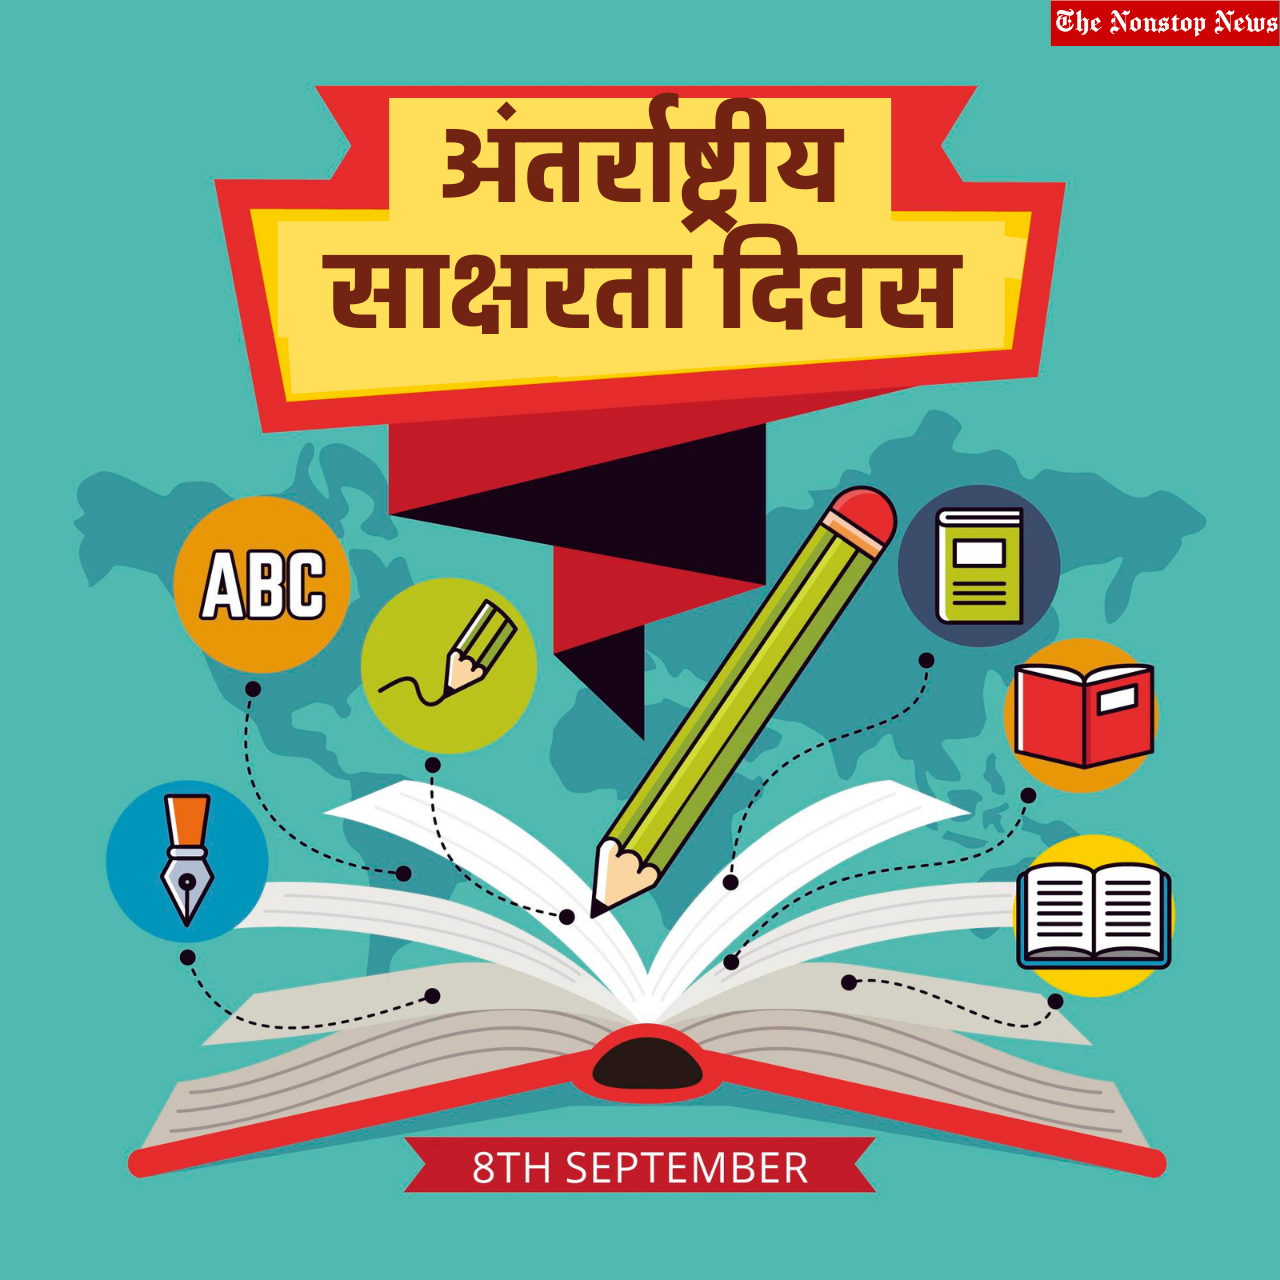 International Literacy Day 2021 Hindi Quotes, HD Images, Wishes, Messages, Greeting, and Status to share